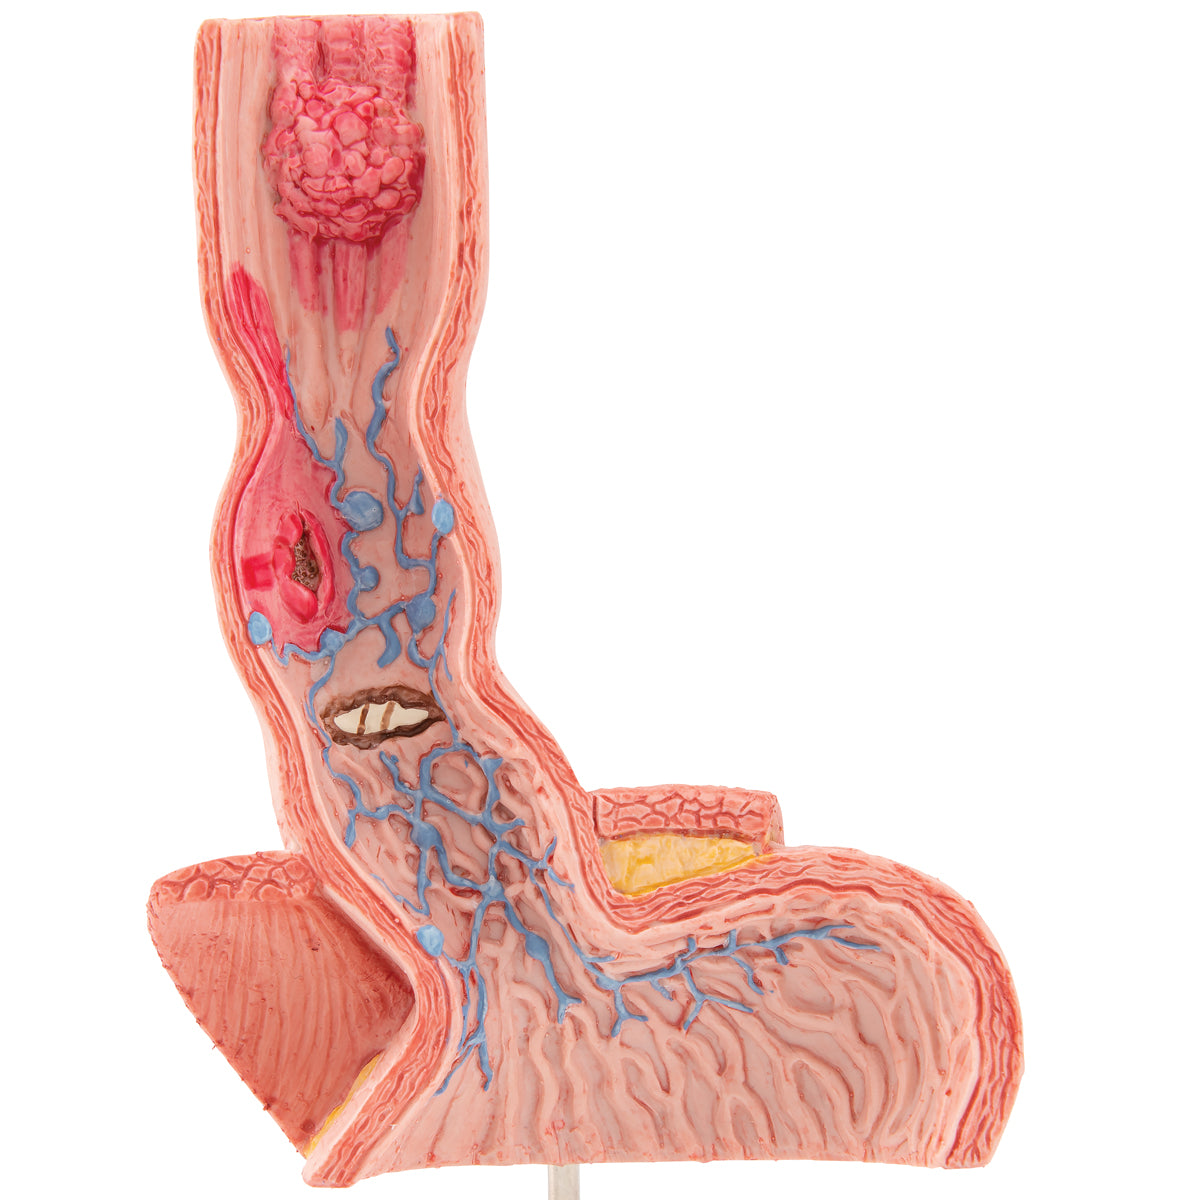 Model showing the esophagus and a bit of the inside of the stomach with various diseases